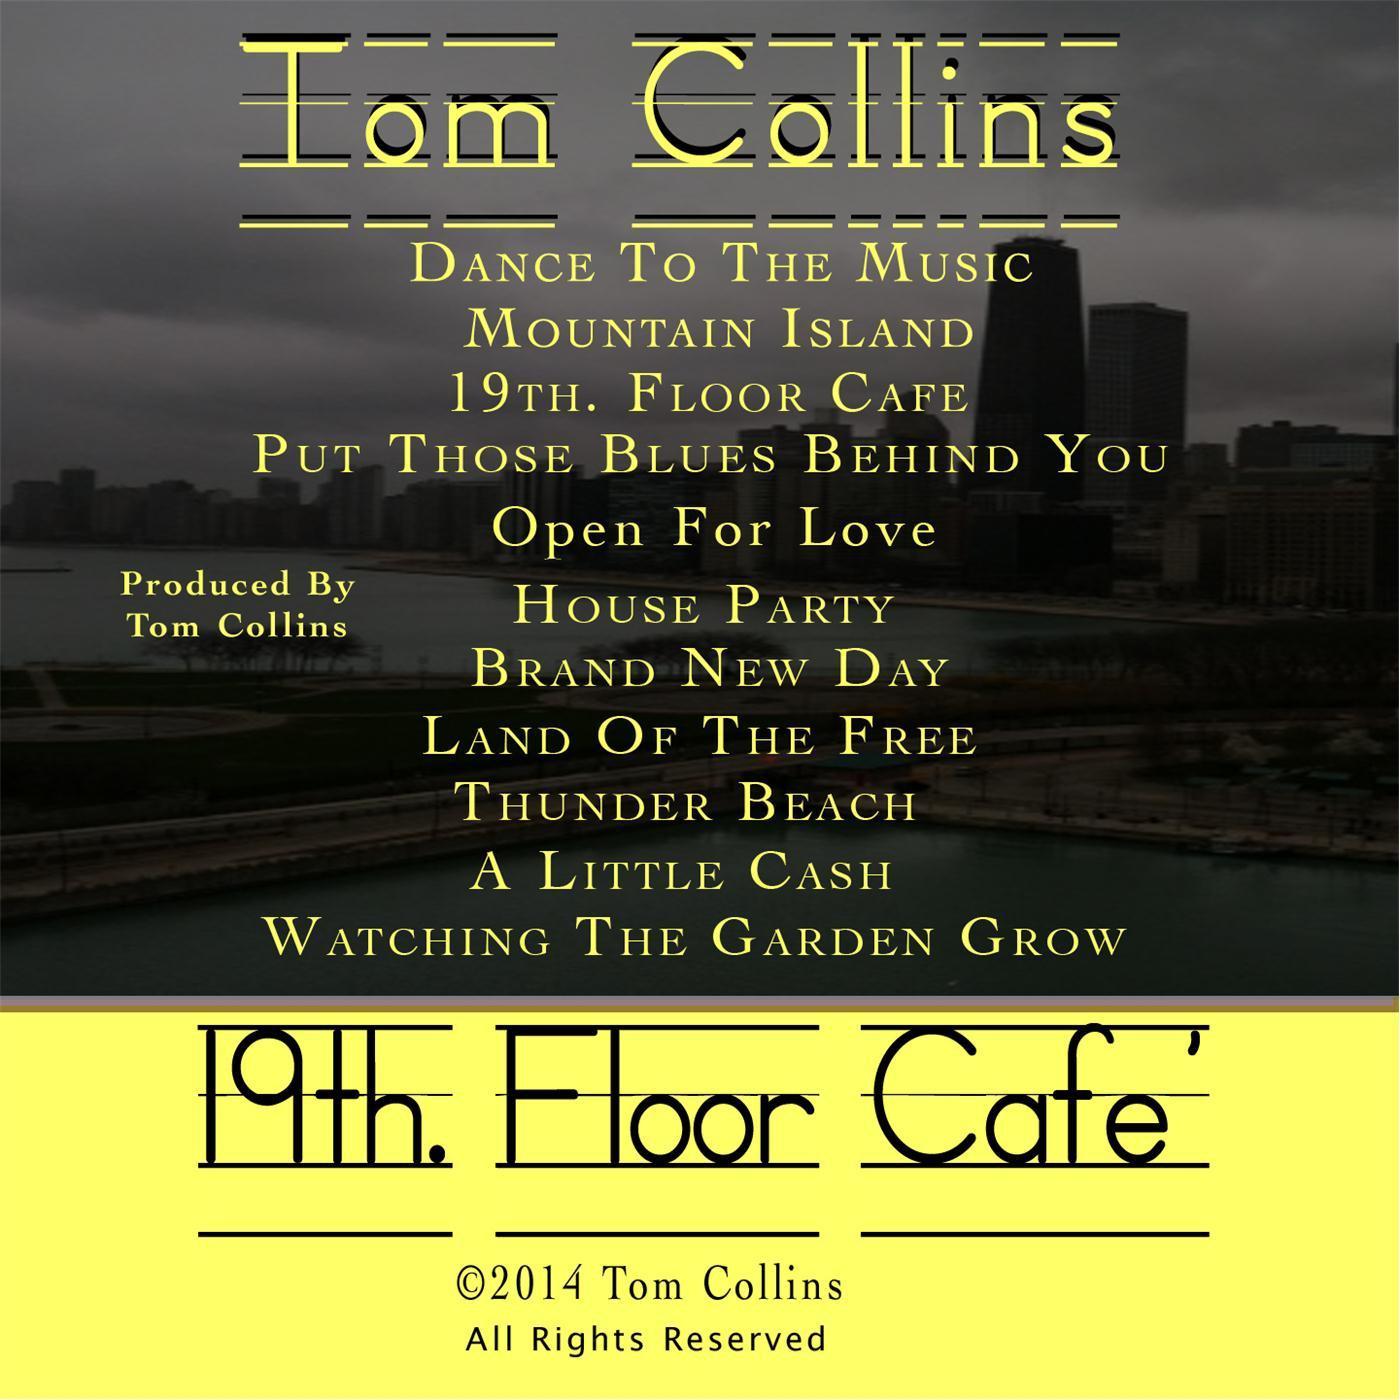 Tom Collins - House Party